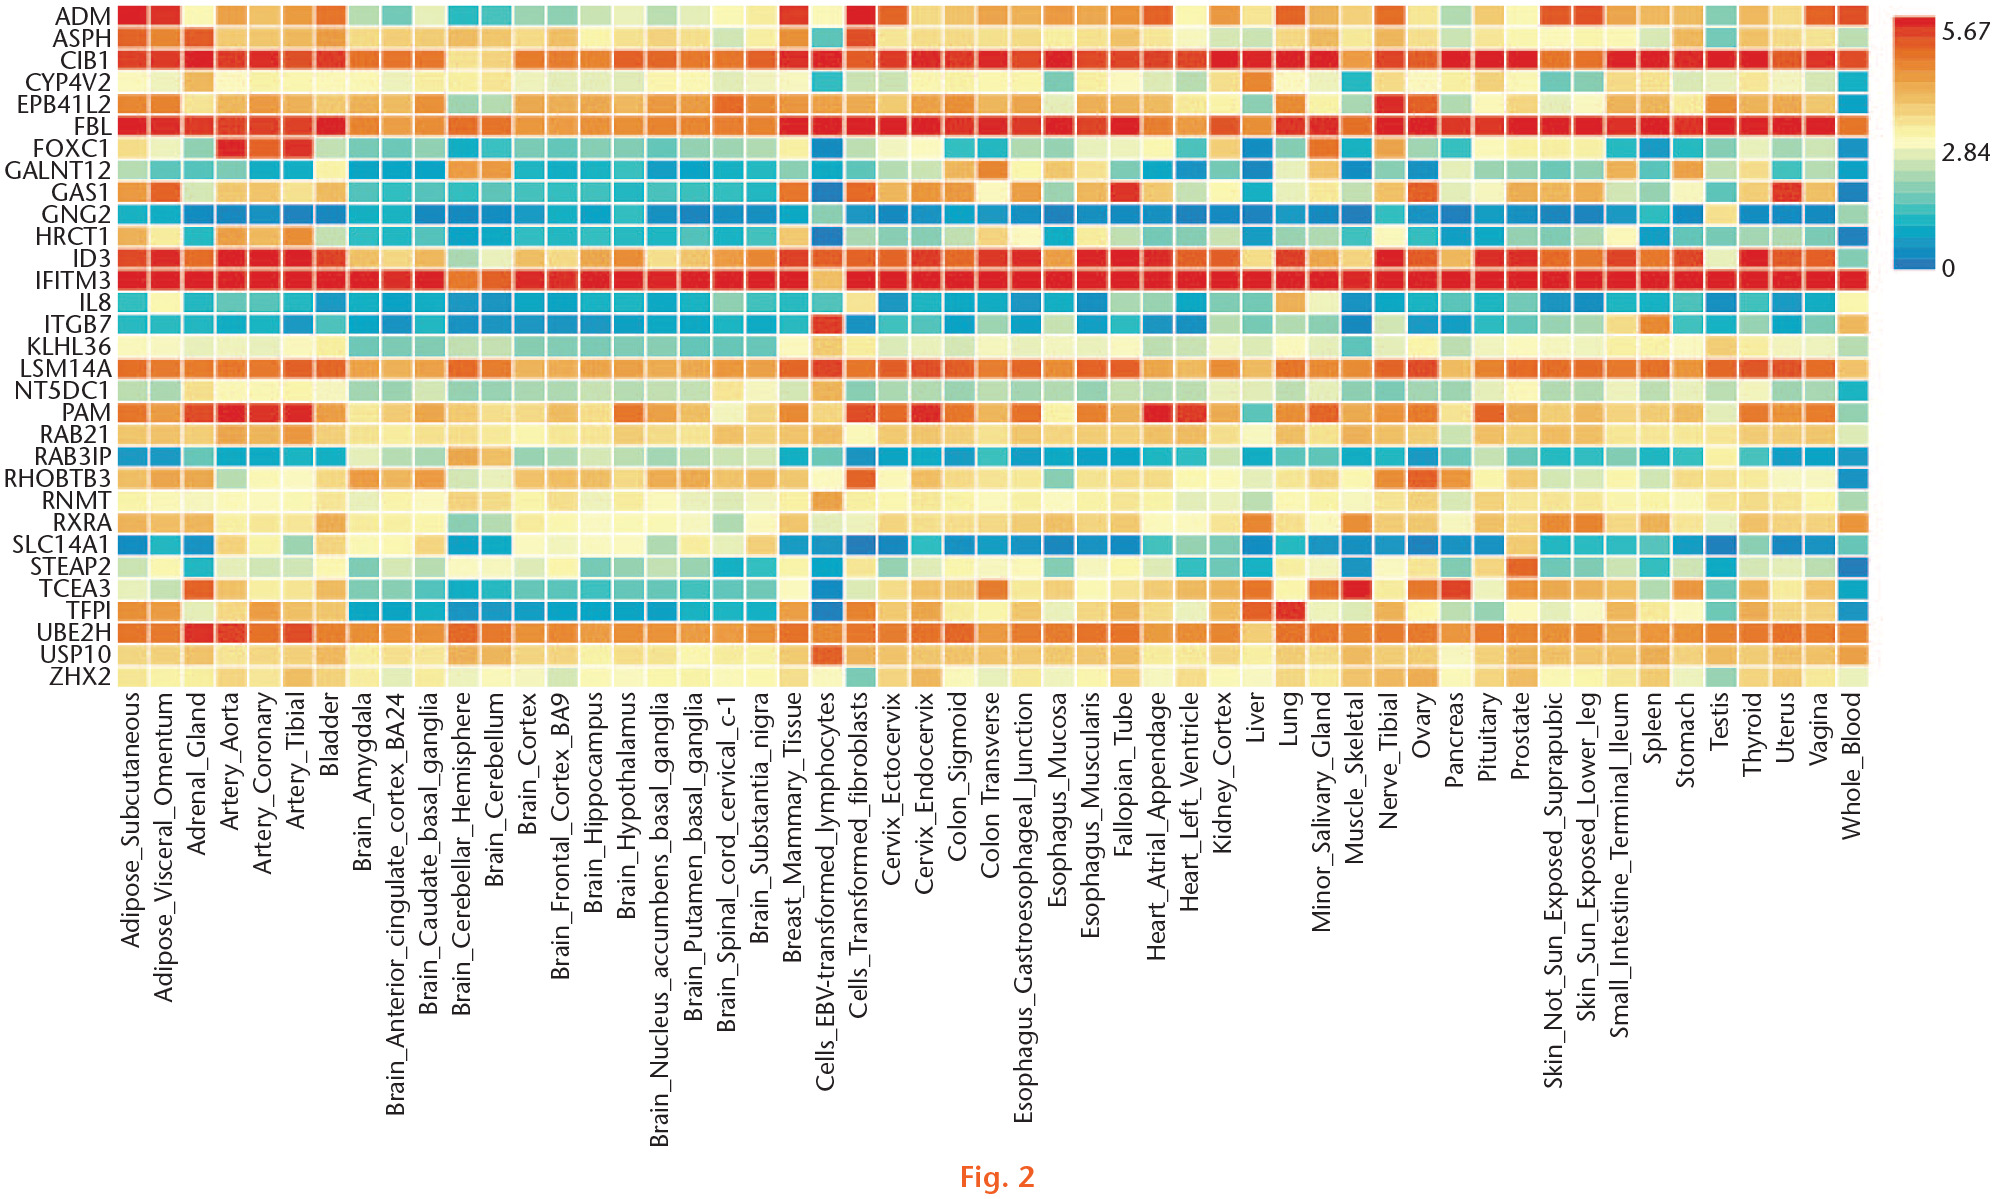 Fig. 2 
            Gene expression heat map of the identified common genes shared by transcriptome-wide association studies (TWAS) and messenger RNA (mRNA) expression data of hip osteoarthritis (OA).
          